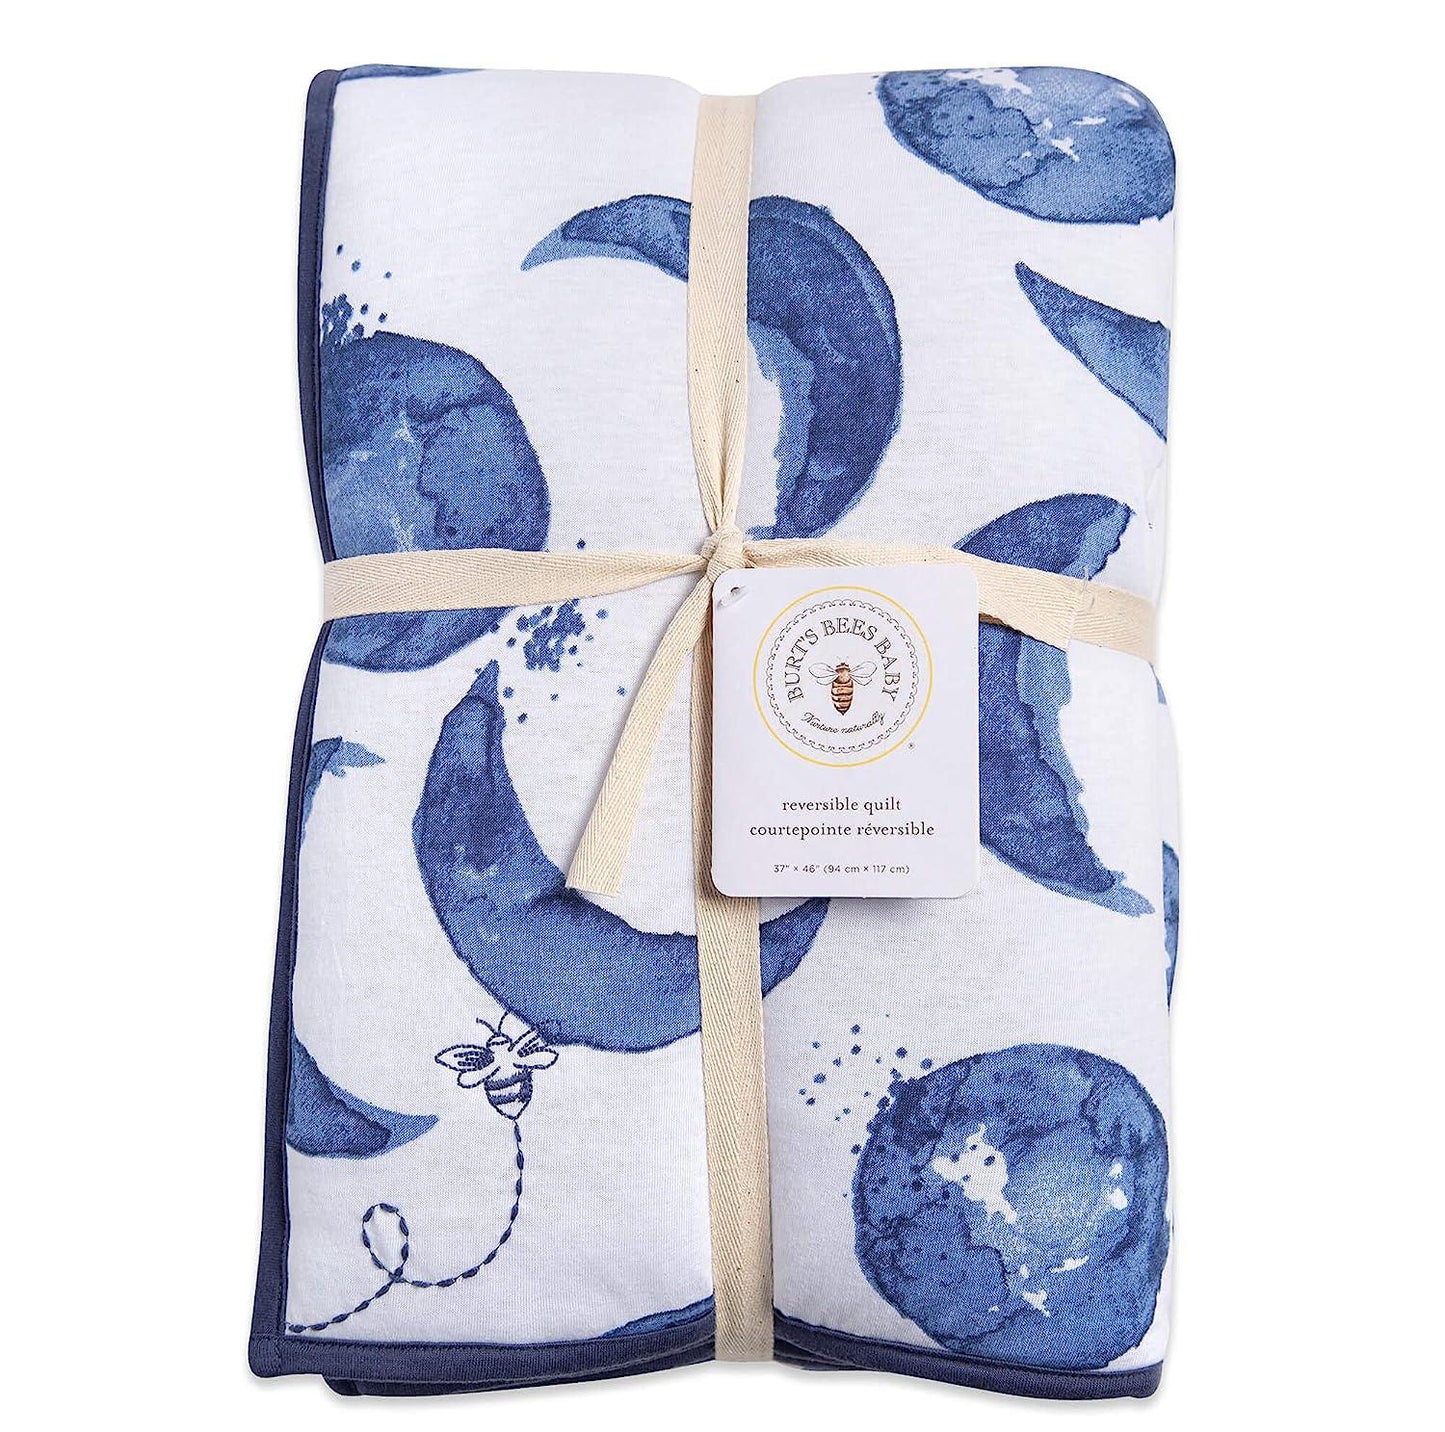 Reversible Quilt, Baby and Toddler Nursery Blanket, Organic Cotton Shell and Polyester Fill-